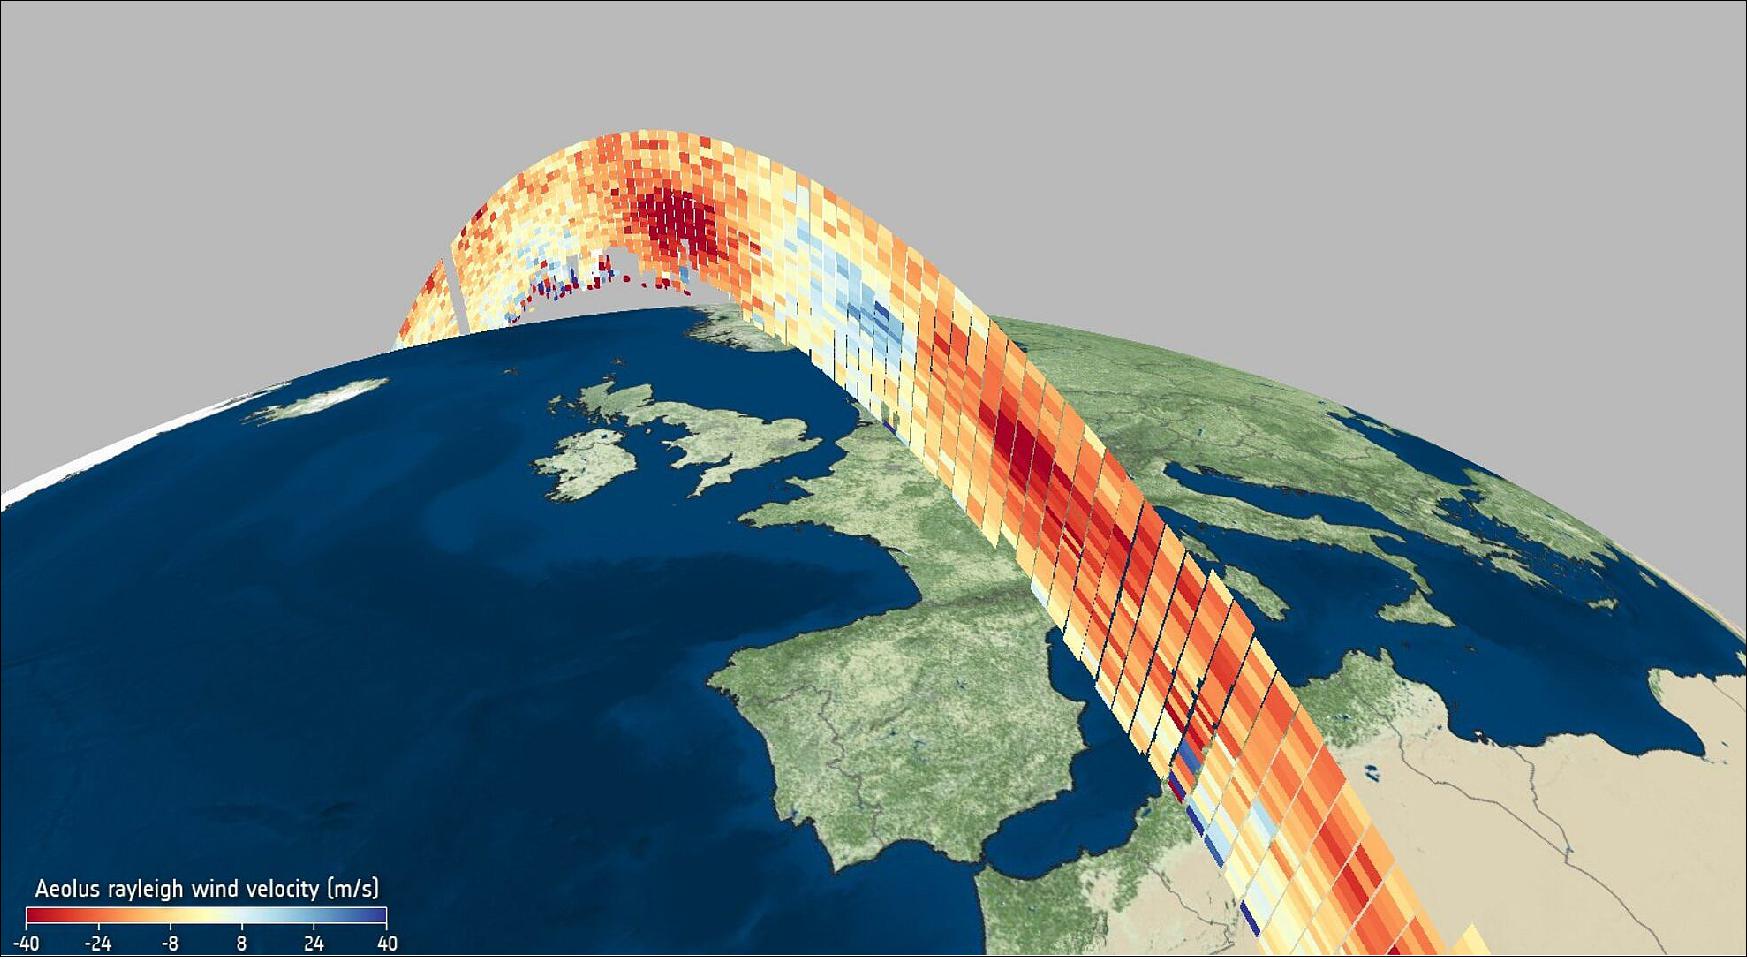 Figure 23: Wind profile from Aeolus 6 May 2020. Carrying breakthrough laser technology, the Aeolus satellite – an ESA Earth Explorer mission – was launched in August 2018. It is the first satellite mission to profile Earth's winds directly from space. Its data are not only being used to understand how wind, pressure, temperature and humidity are interlinked to contribute to climate research, but are also now being used in near-realtime for weather forecasting. This image is an example of Level-2B Rayleigh wind velocity in m/s second over Europe on 6 May 2020 at 06:00 UTC (image credit: ESA/VirES)